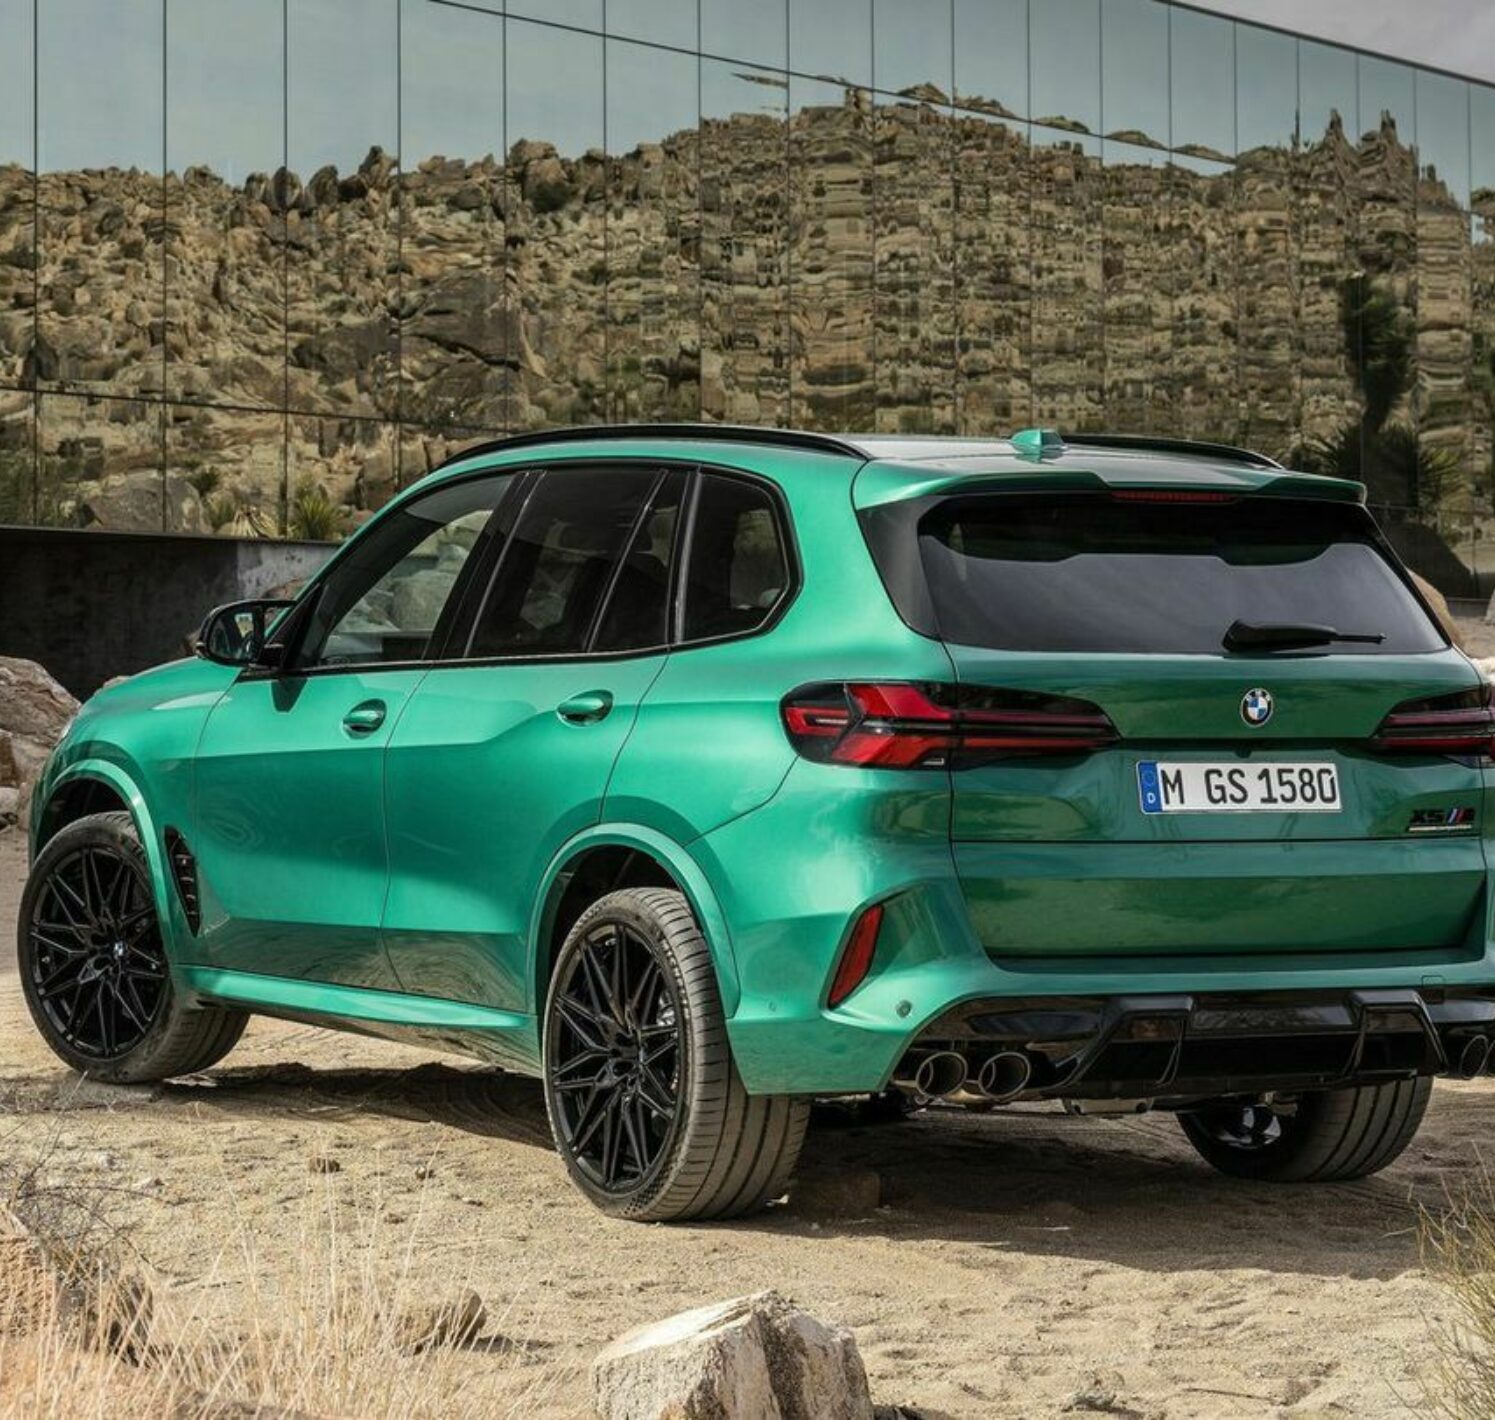 https://autofilter.sk/assets/images/x5/gallery/bmw-x5-m-competition-3-galeria.jpg - obrazok